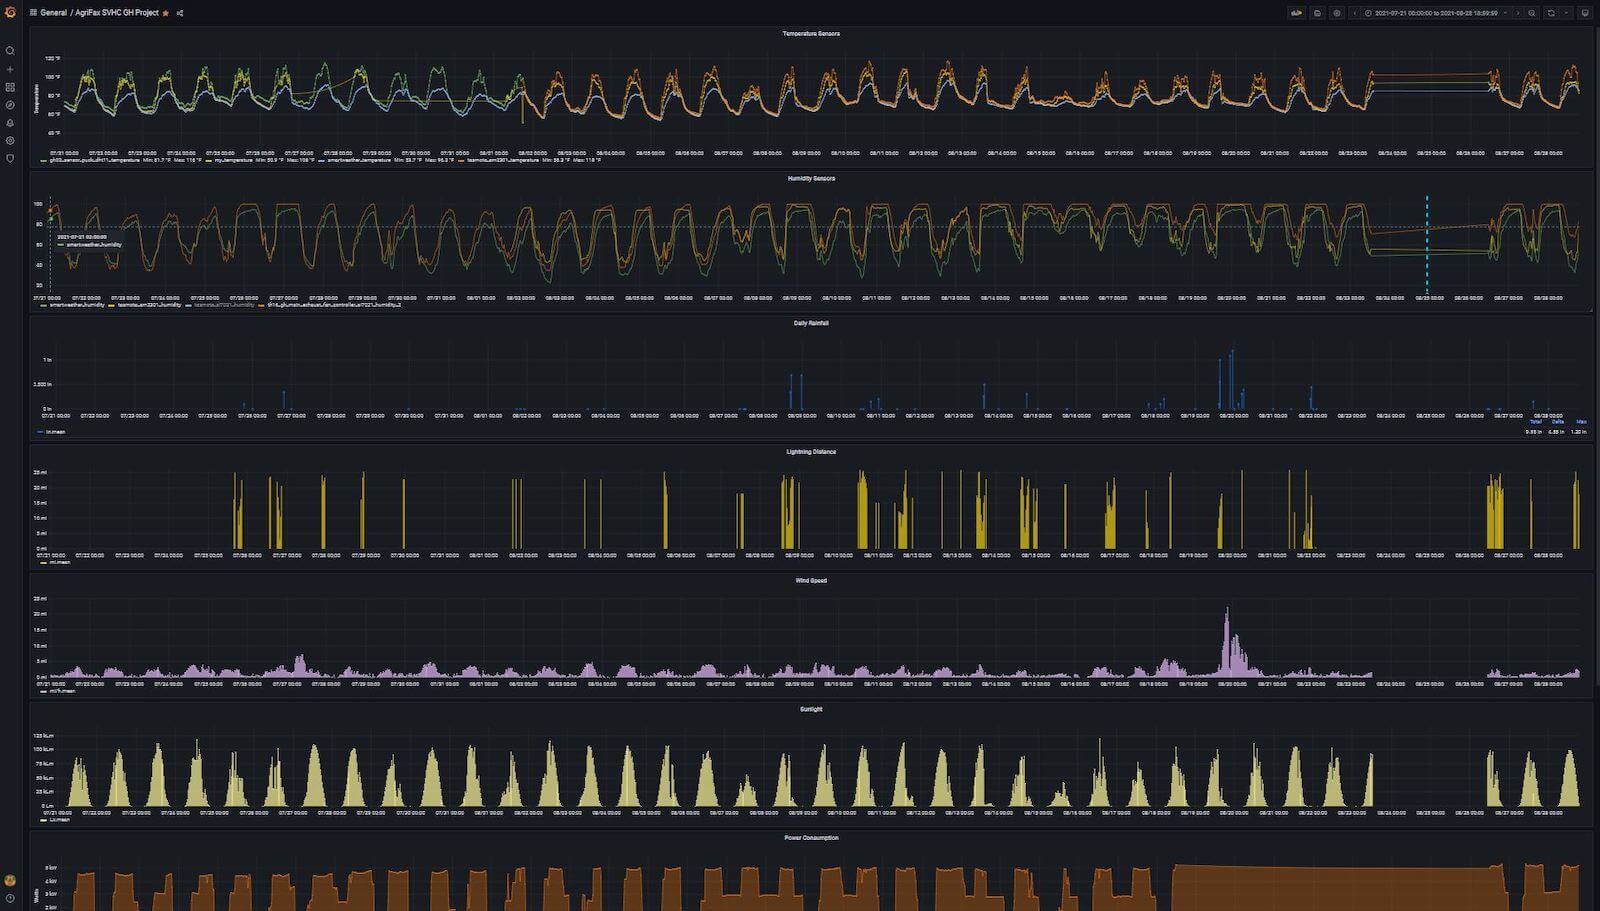 Grafana dashboard created by Agritech showing 90 days of data from Pure Shenandoah's greenhouses.